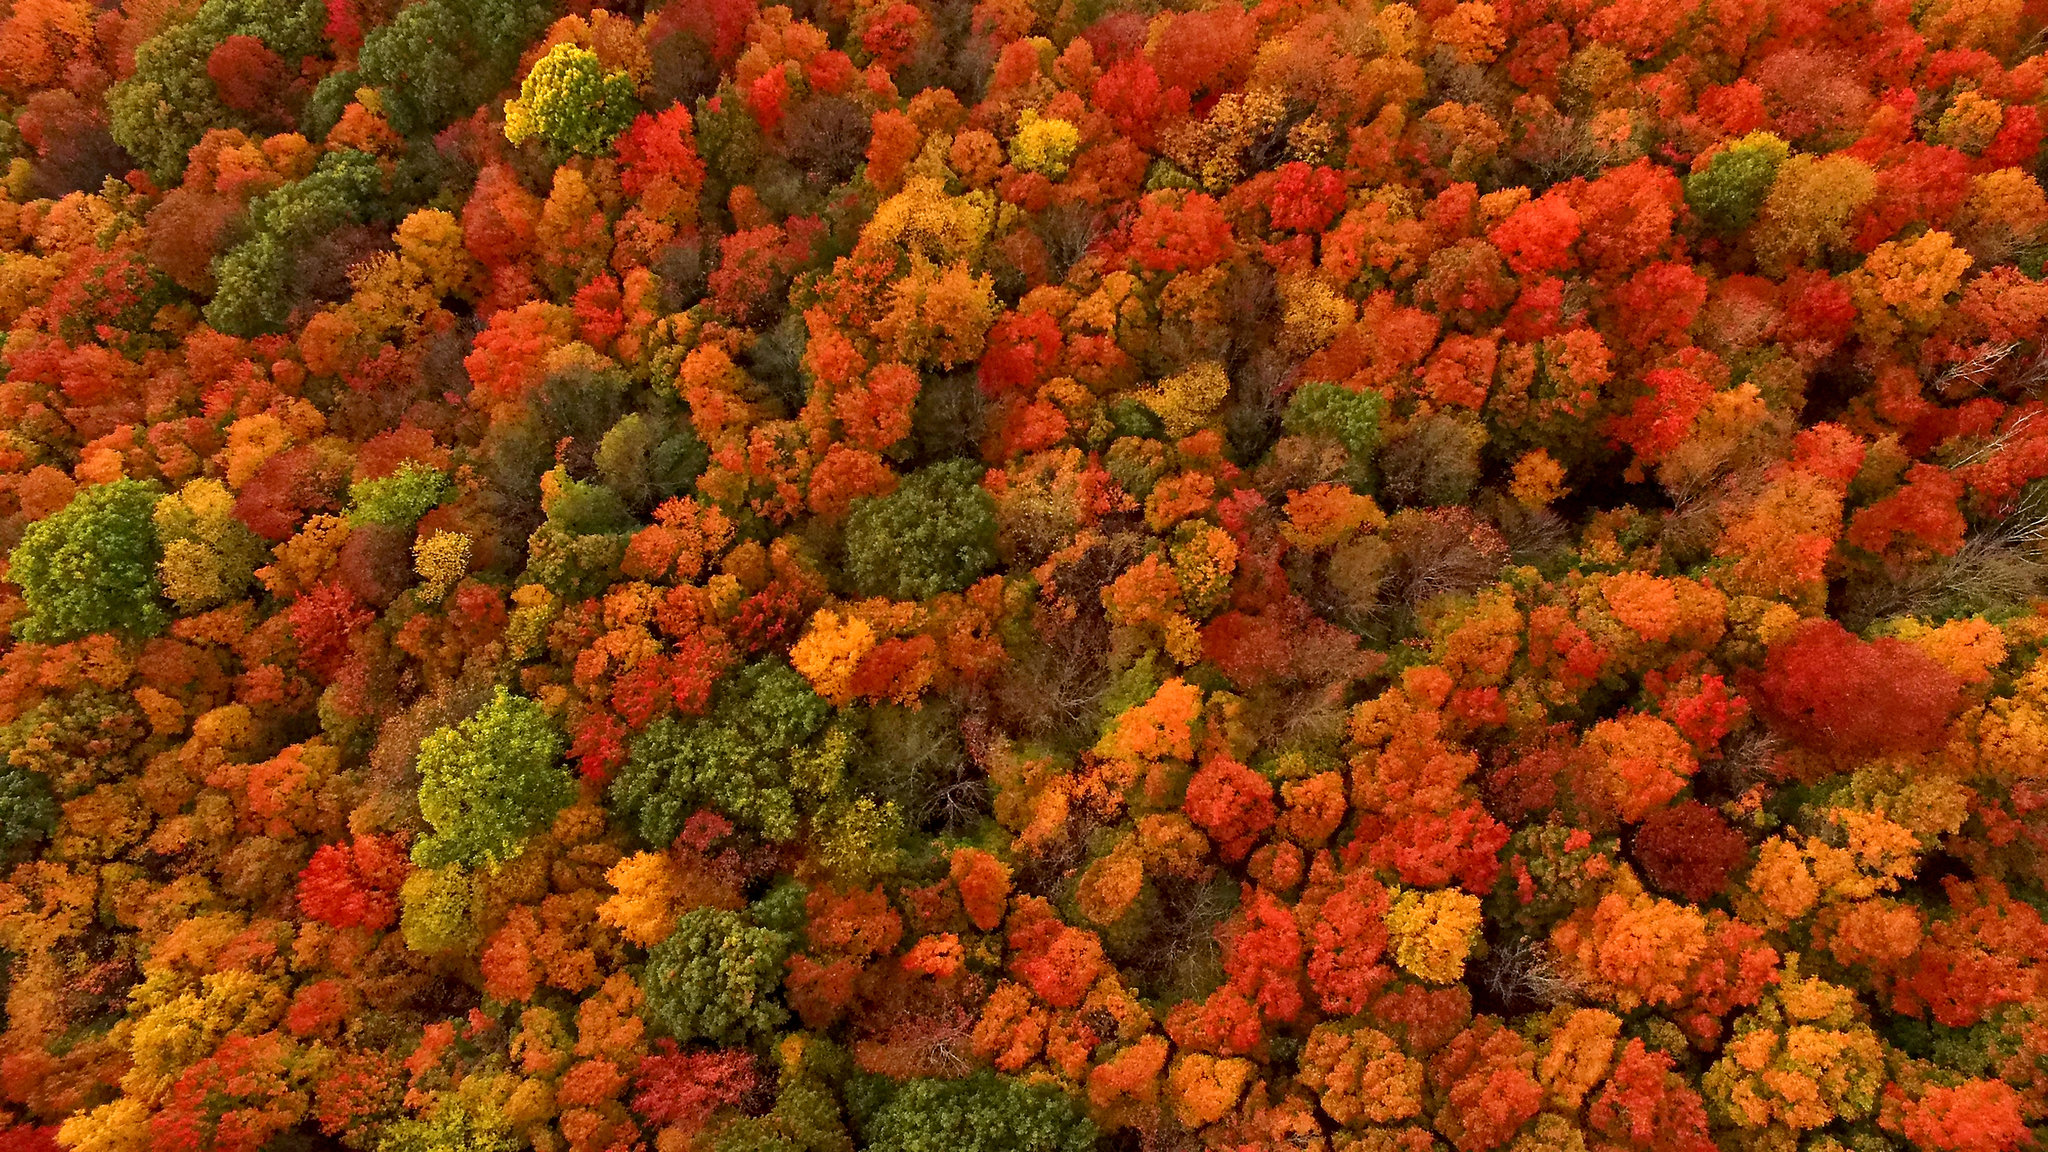 Why Does Fall Foliage Turn So Red and Fiery? It Depends